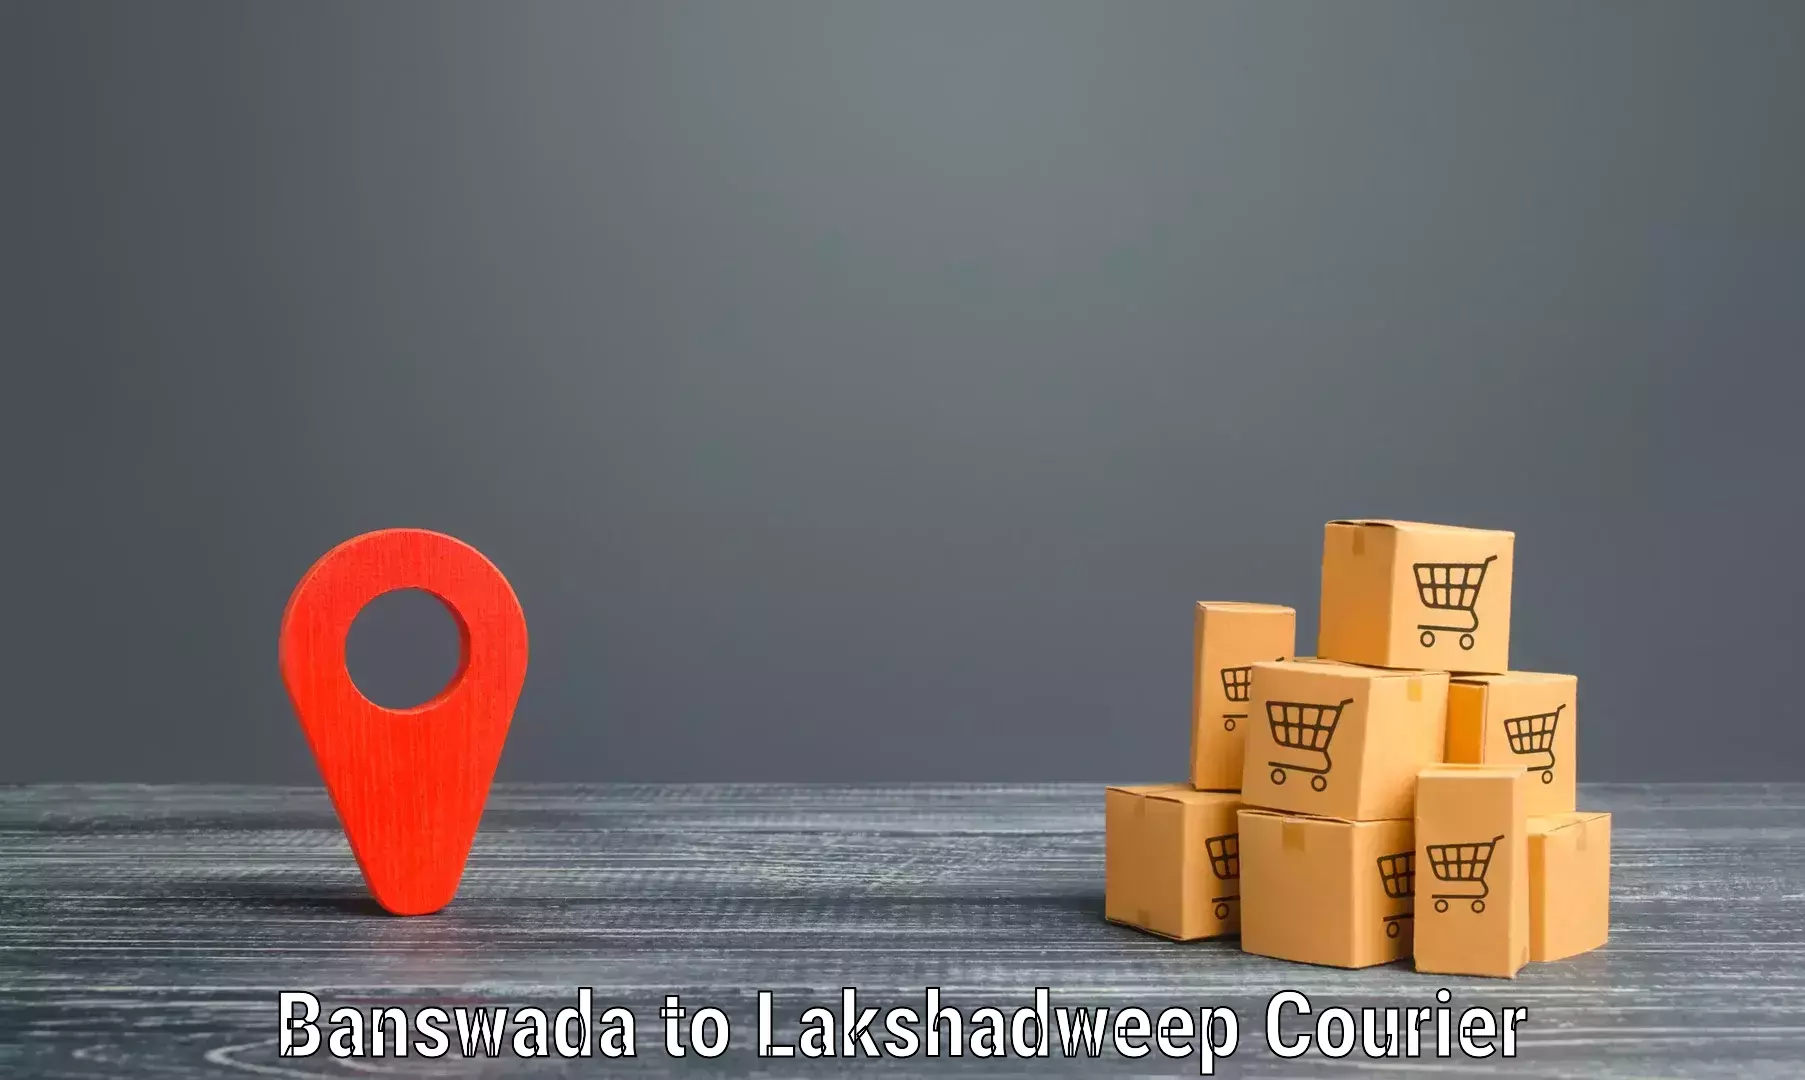 Quick dispatch service in Banswada to Lakshadweep